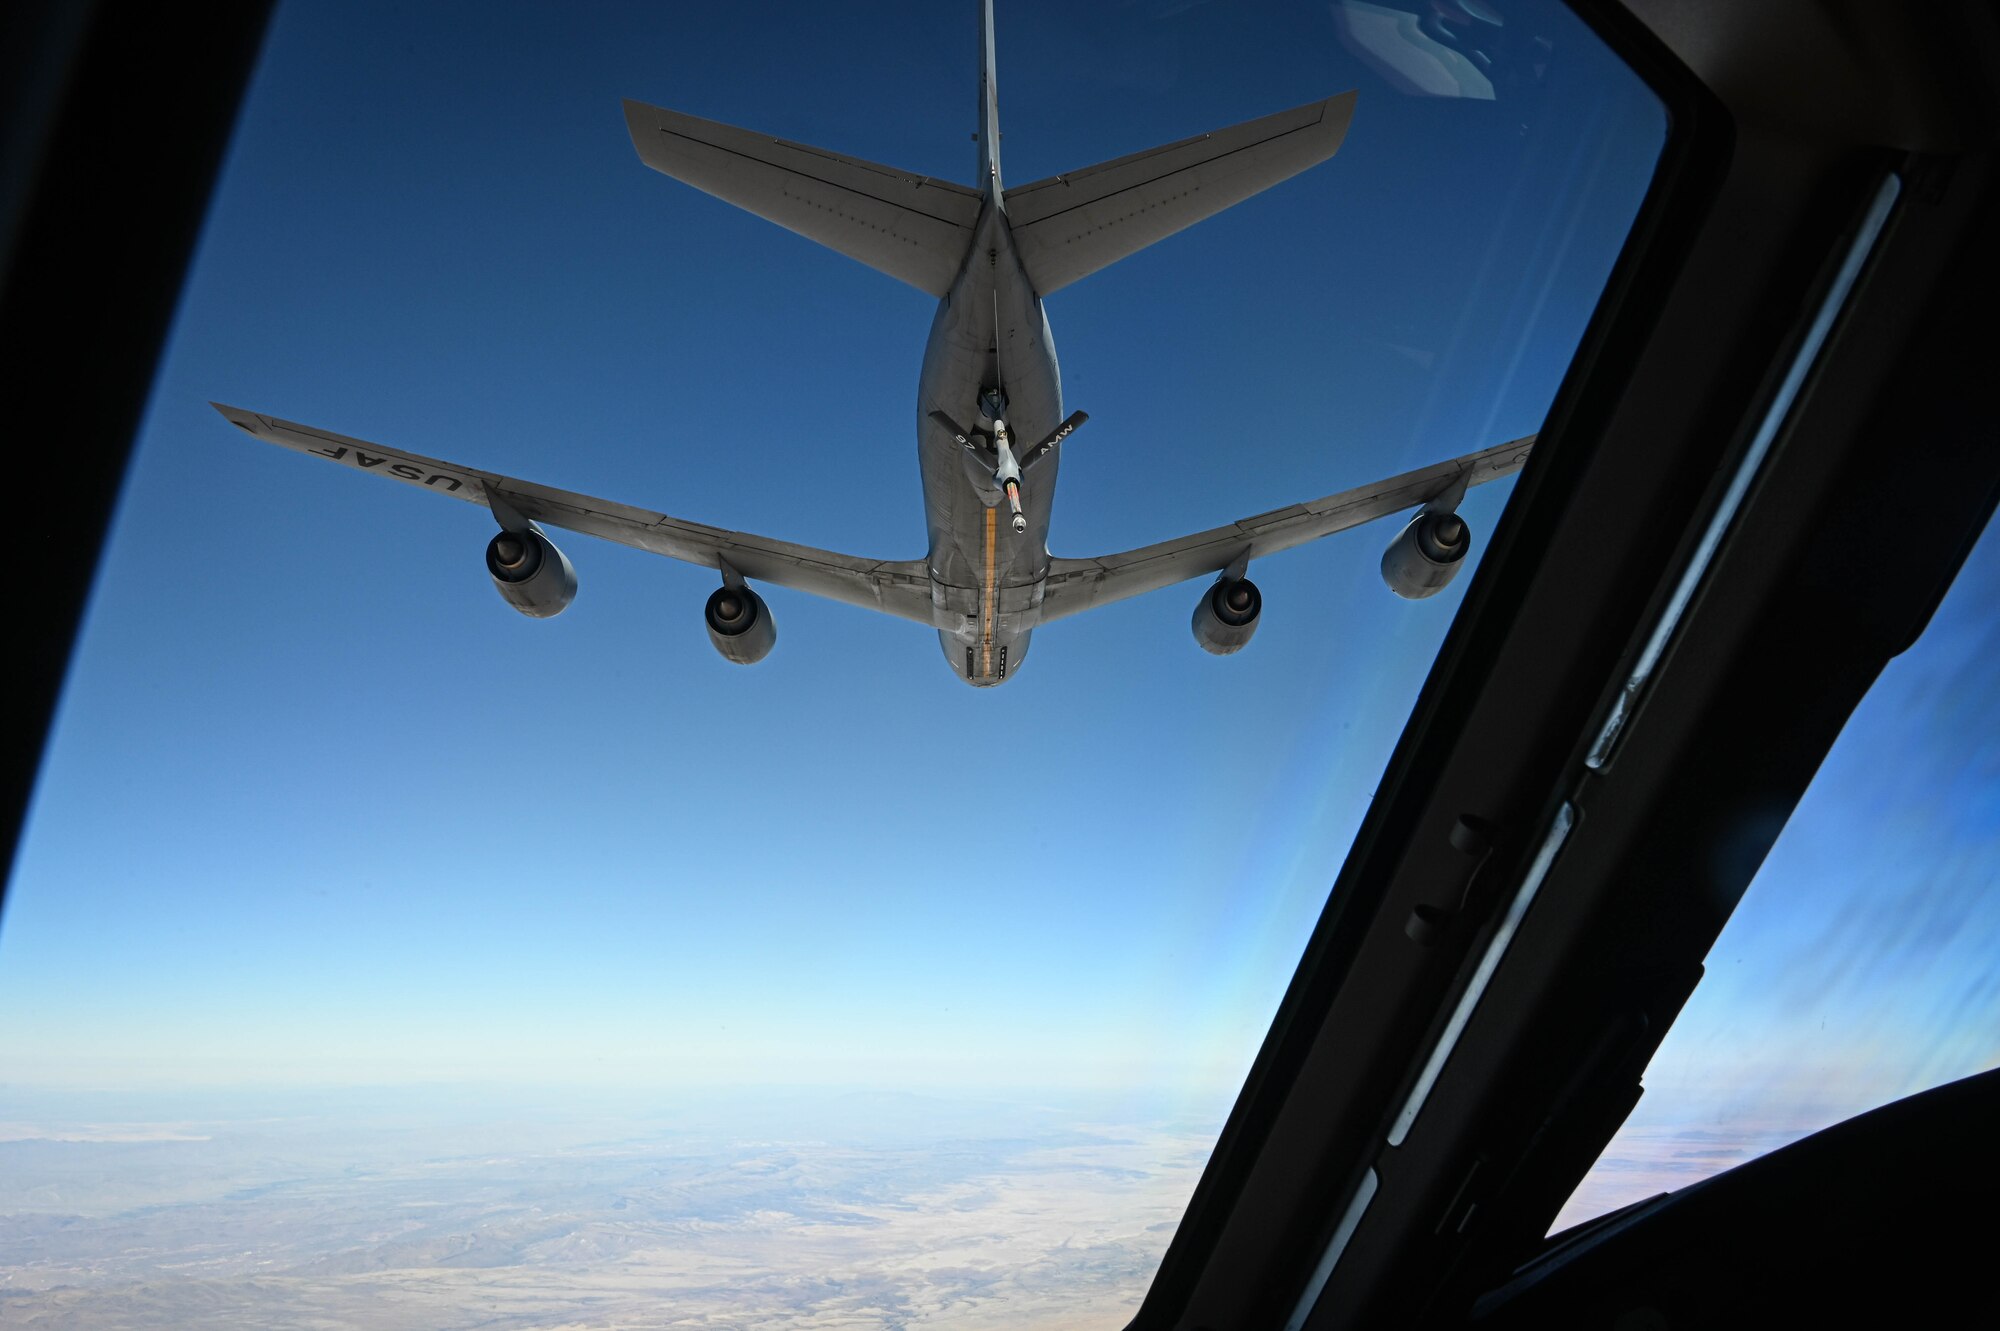 A KC-135 Stratotanker begins the air refueling process for a KC-46 Pegasus, March 10, 2022. The KC-135 is one of the first capable in-flight refueling aircraft, starting its service in 1956. (U.S. Air Force photo by Senior Airman Kayla Christenson)